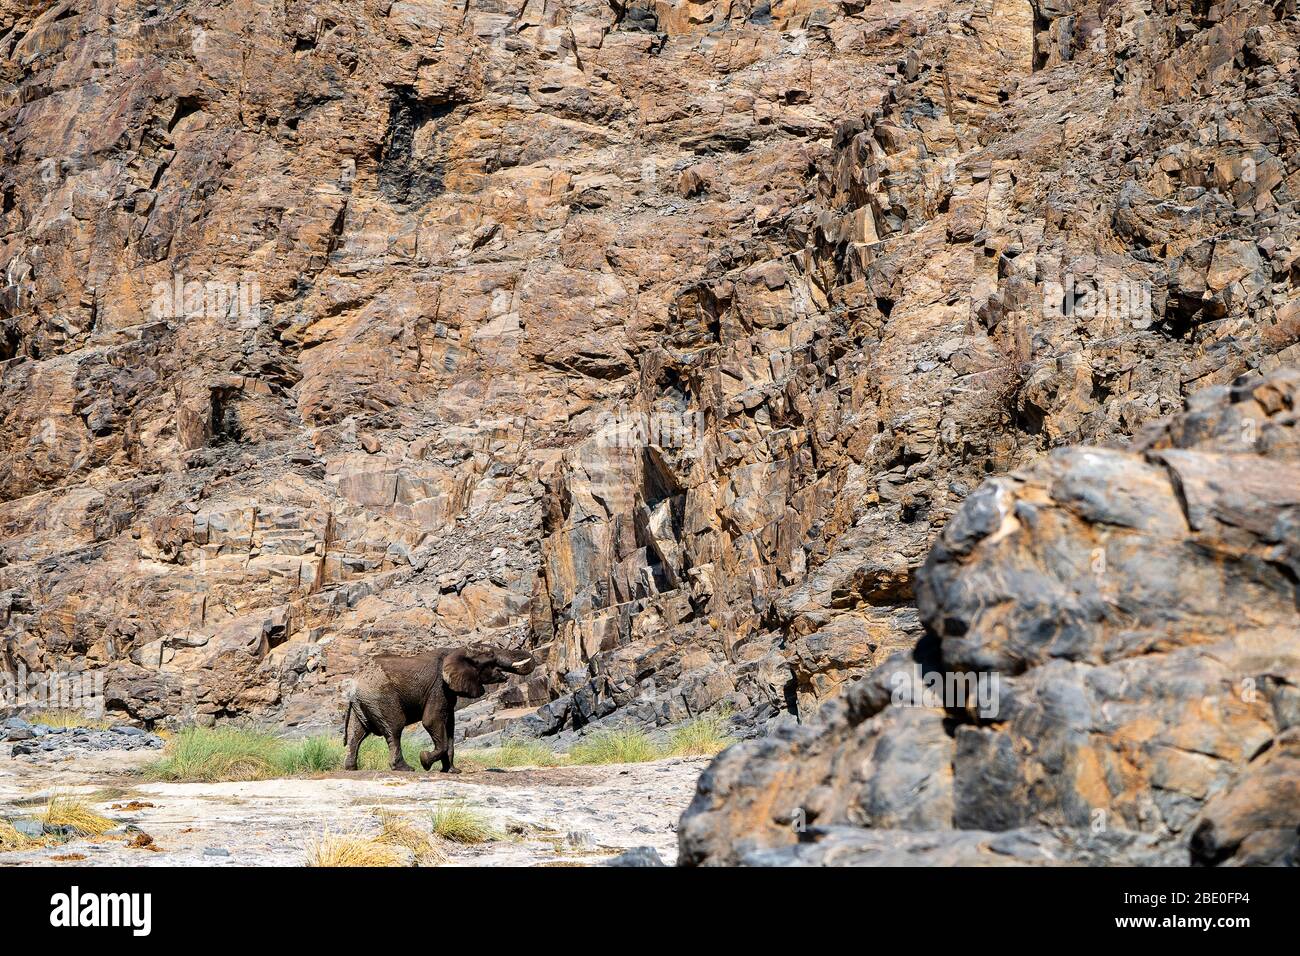 an elephant quenches its thirst in a hot canyon Stock Photo